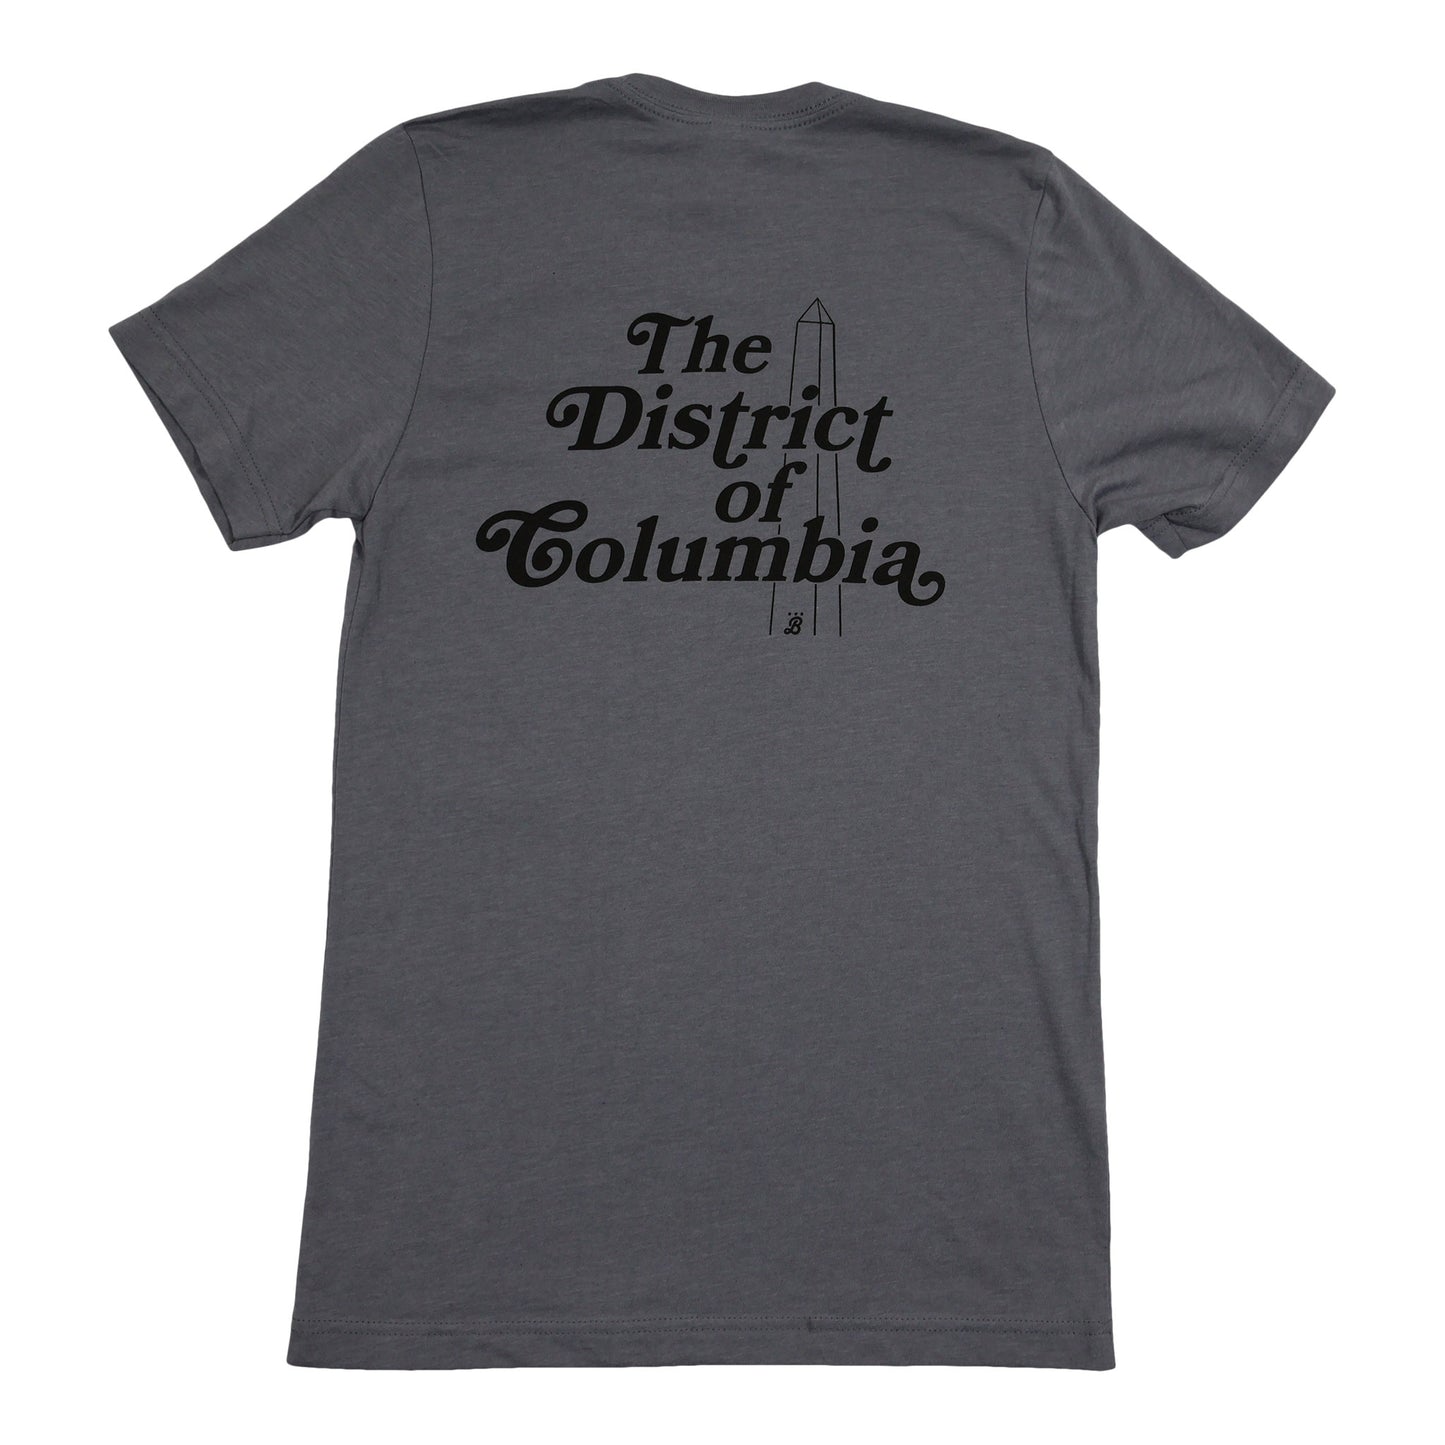 Unisex 'The District of Columbia' double-sided T-shirt